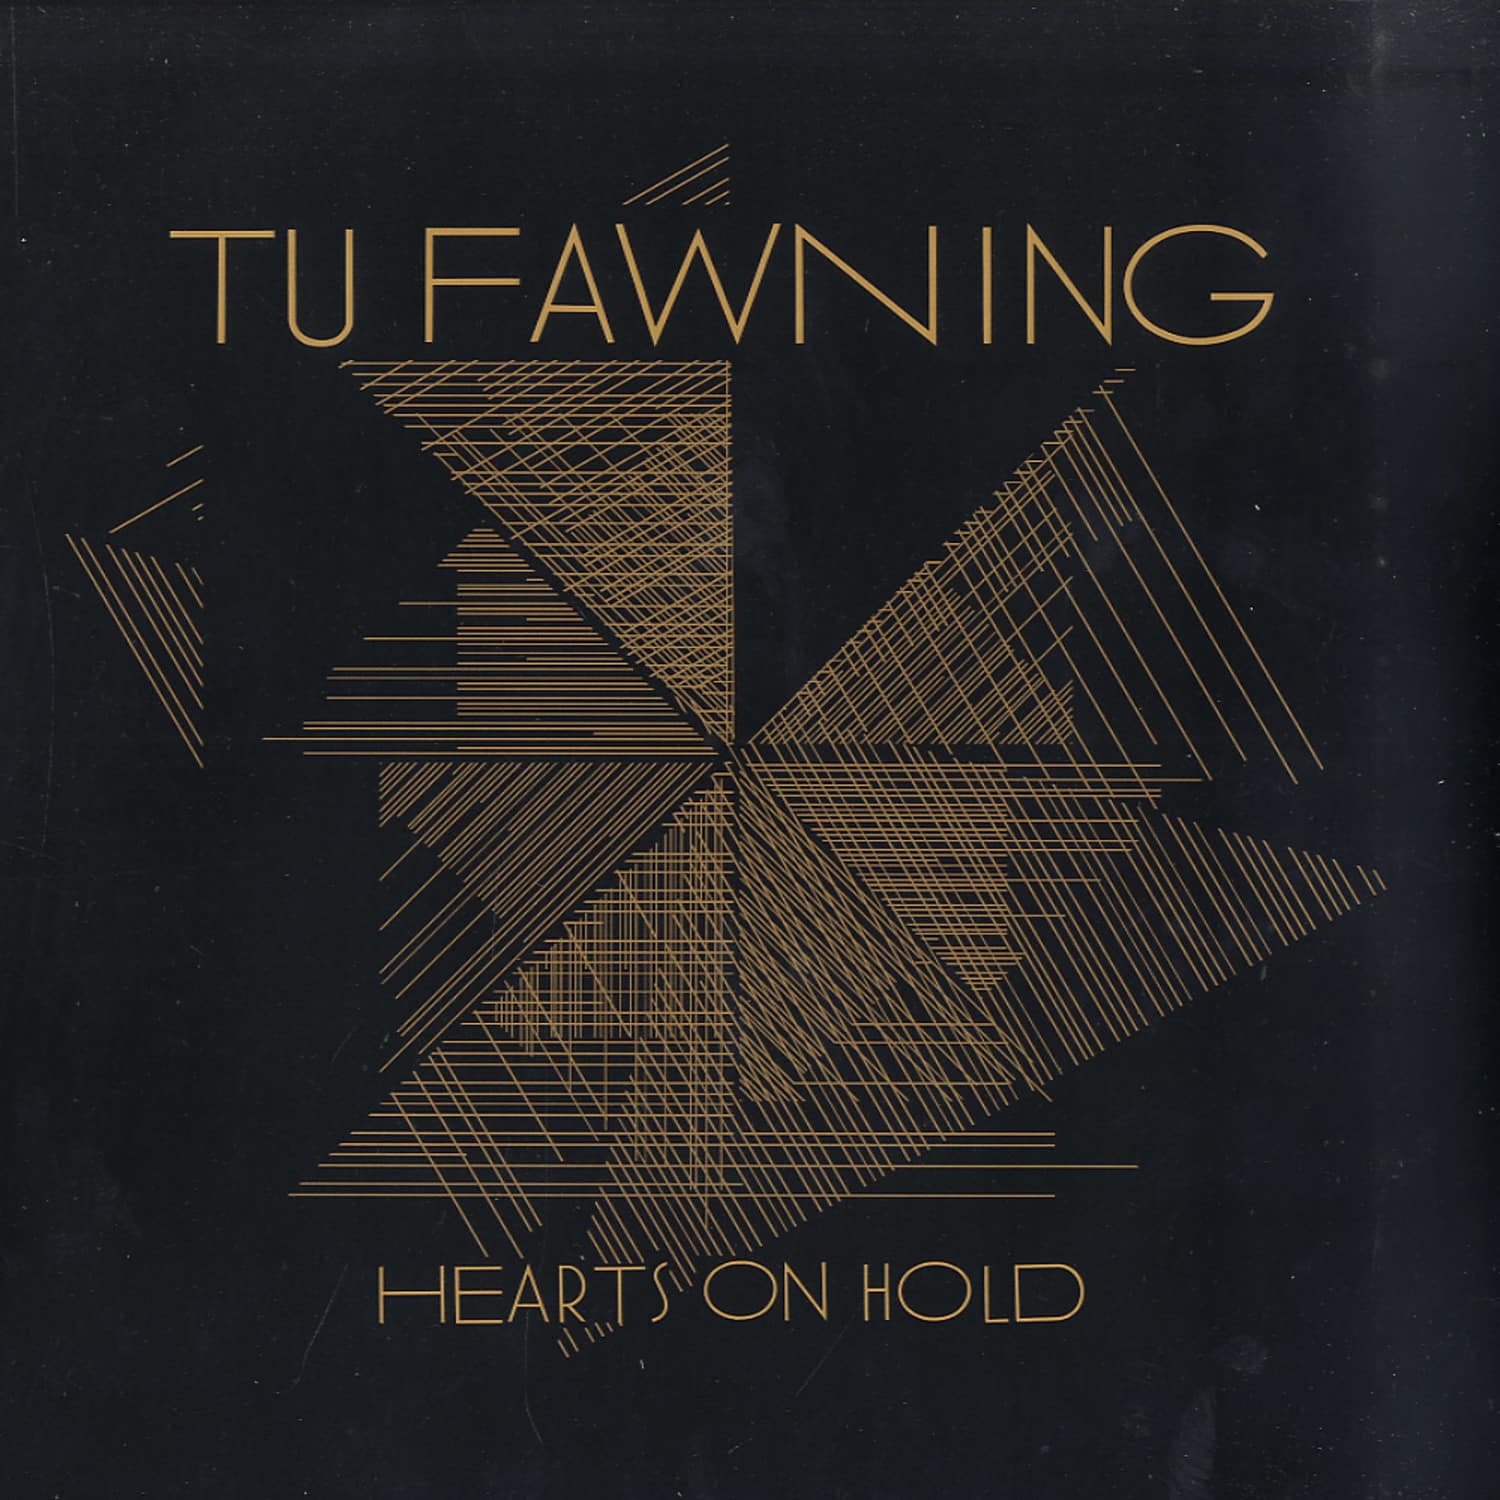 Tu Fawning - HEARTS ON HOLD 